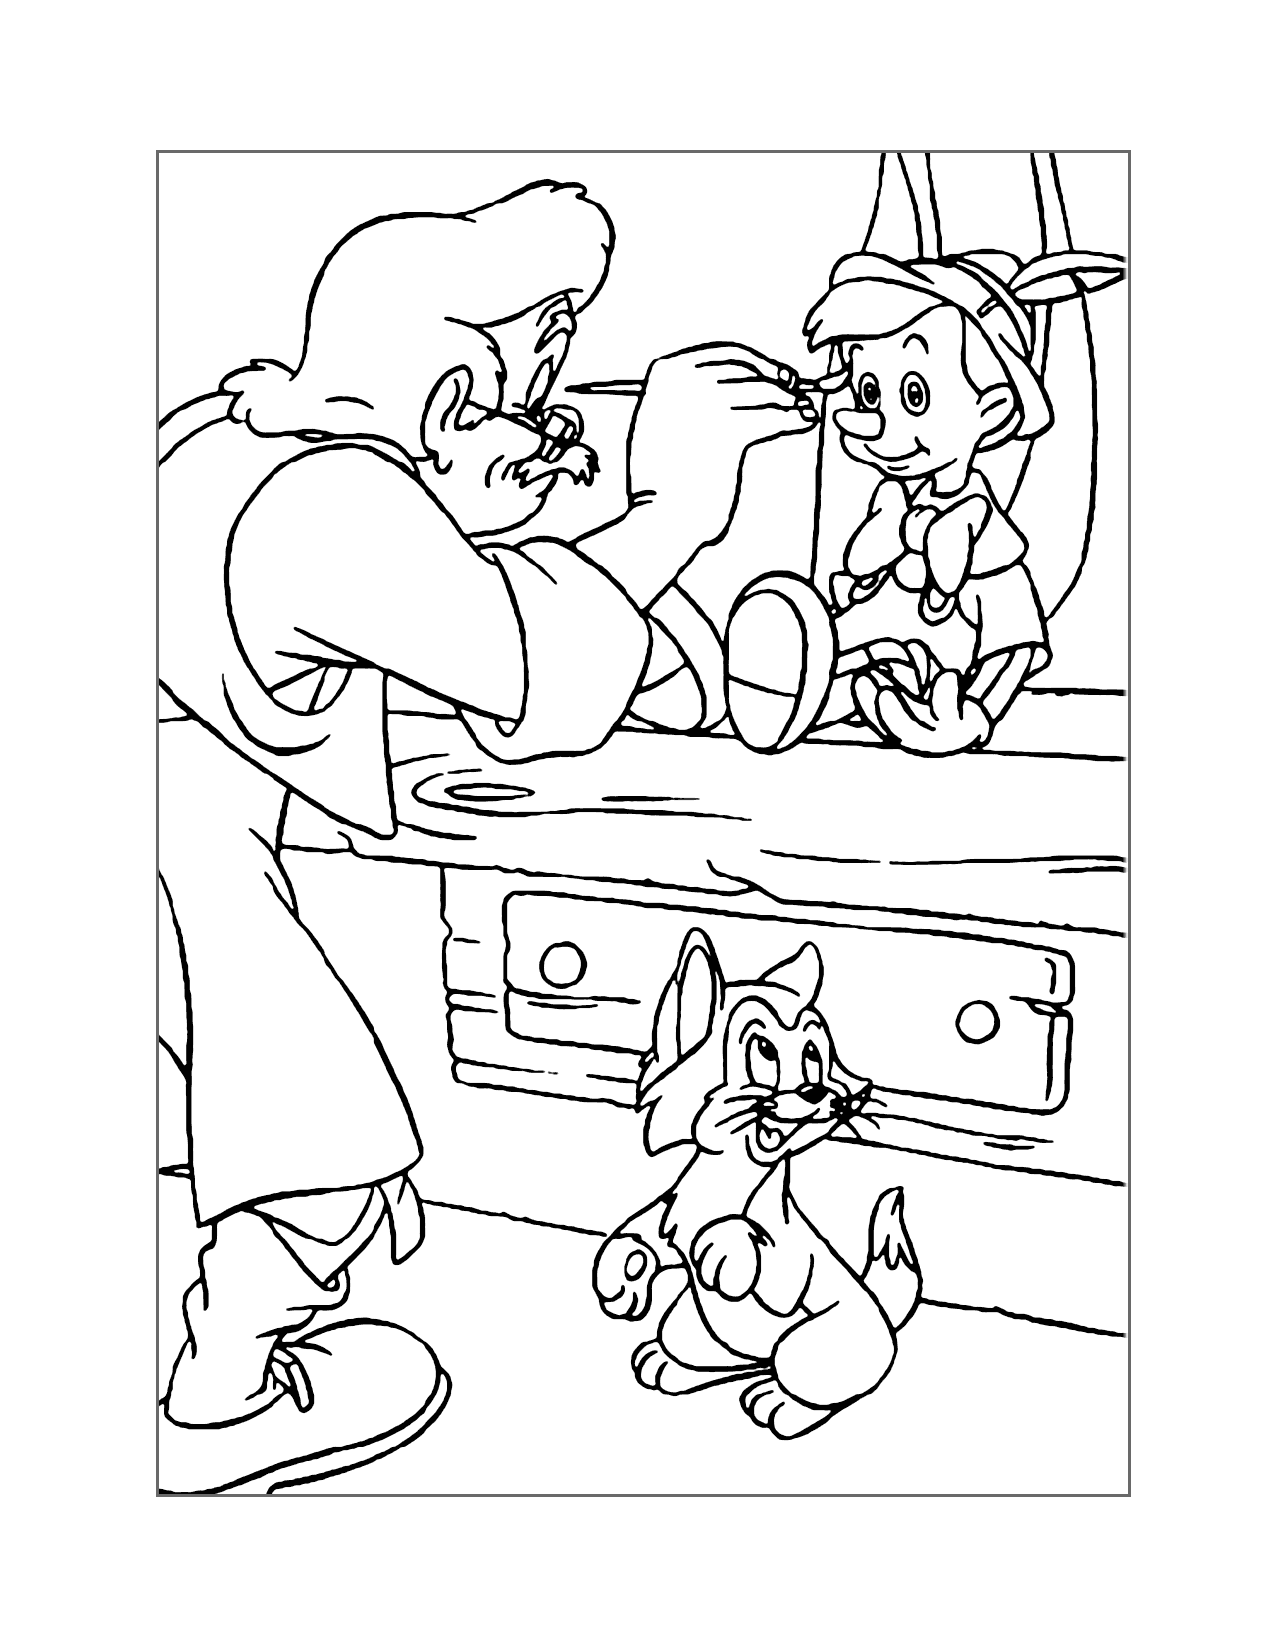 Geppetto Creates Pinocchio Coloring Page